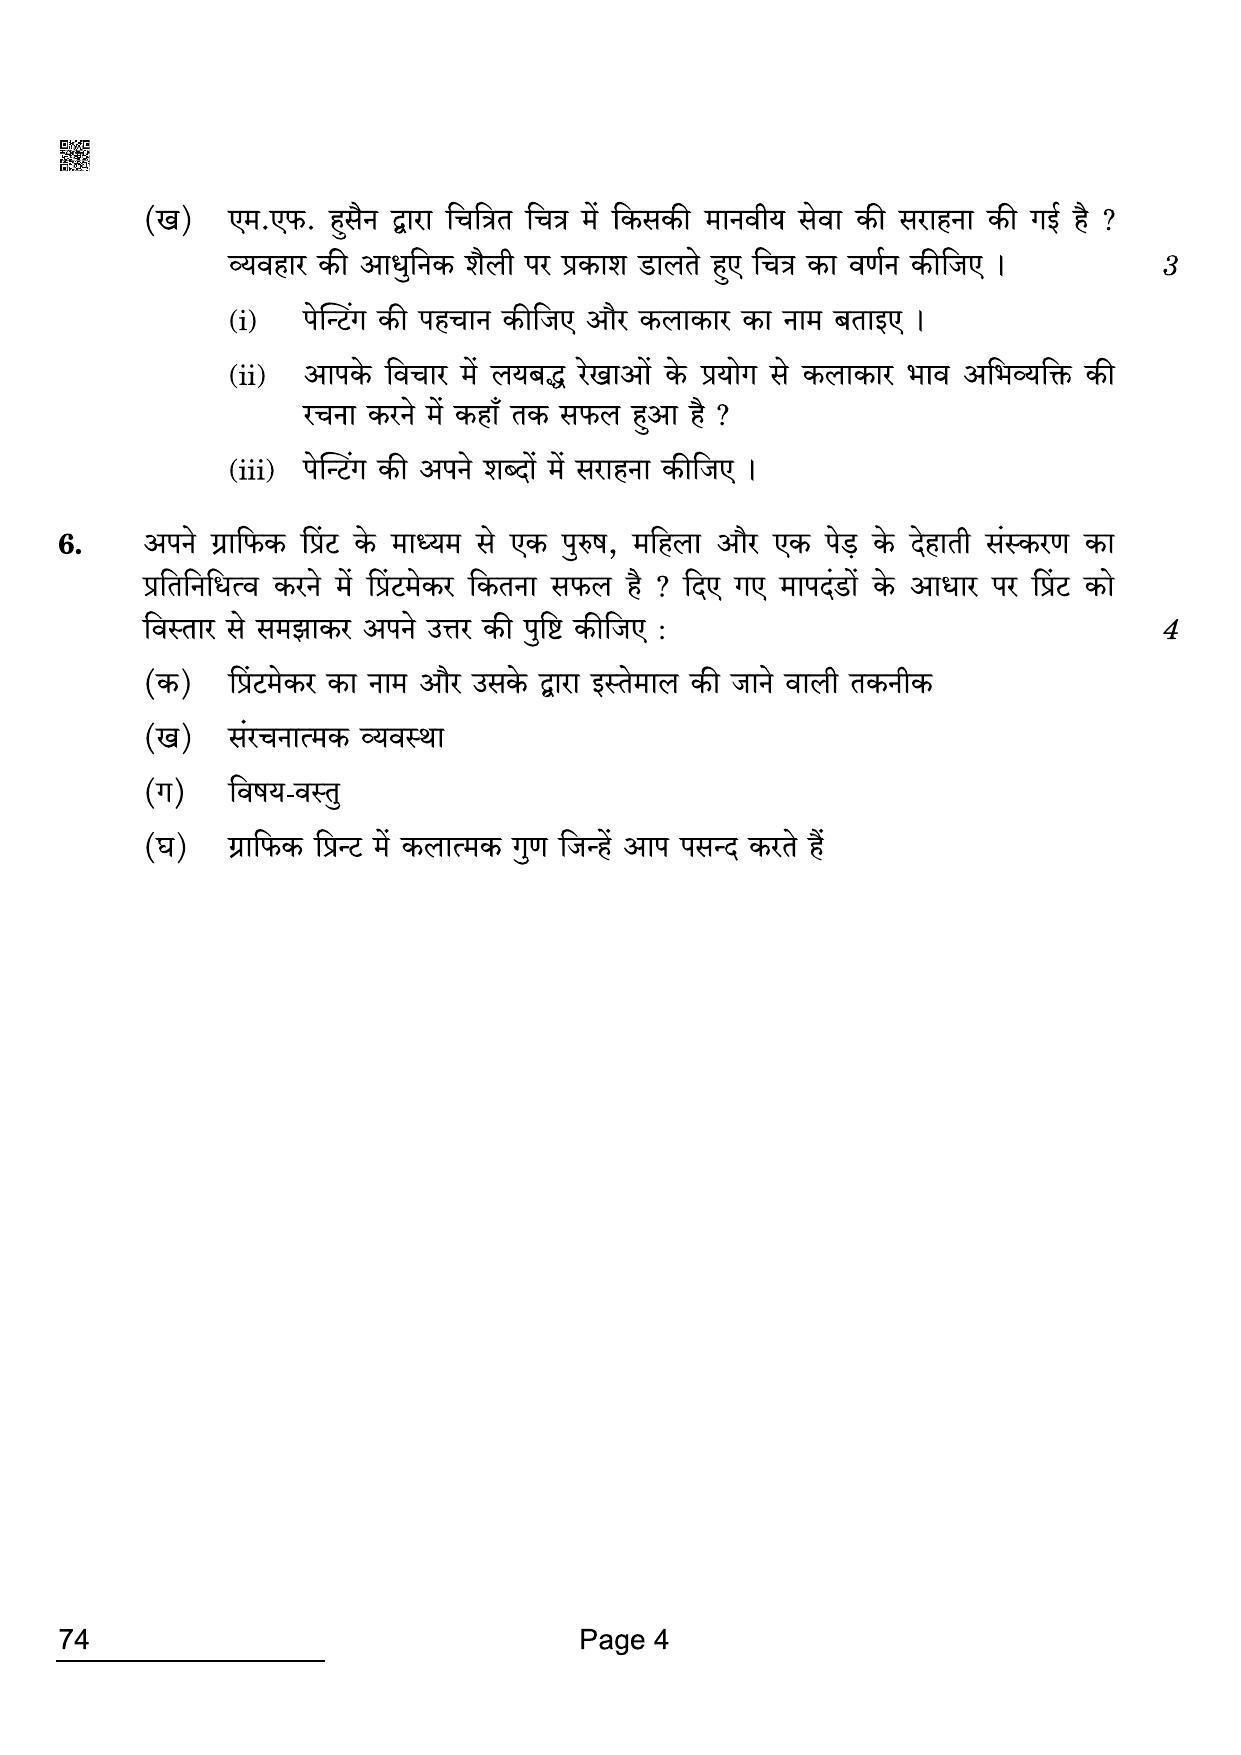 CBSE Class 12 74 Graphics 2022 Compartment Question Paper - Page 4